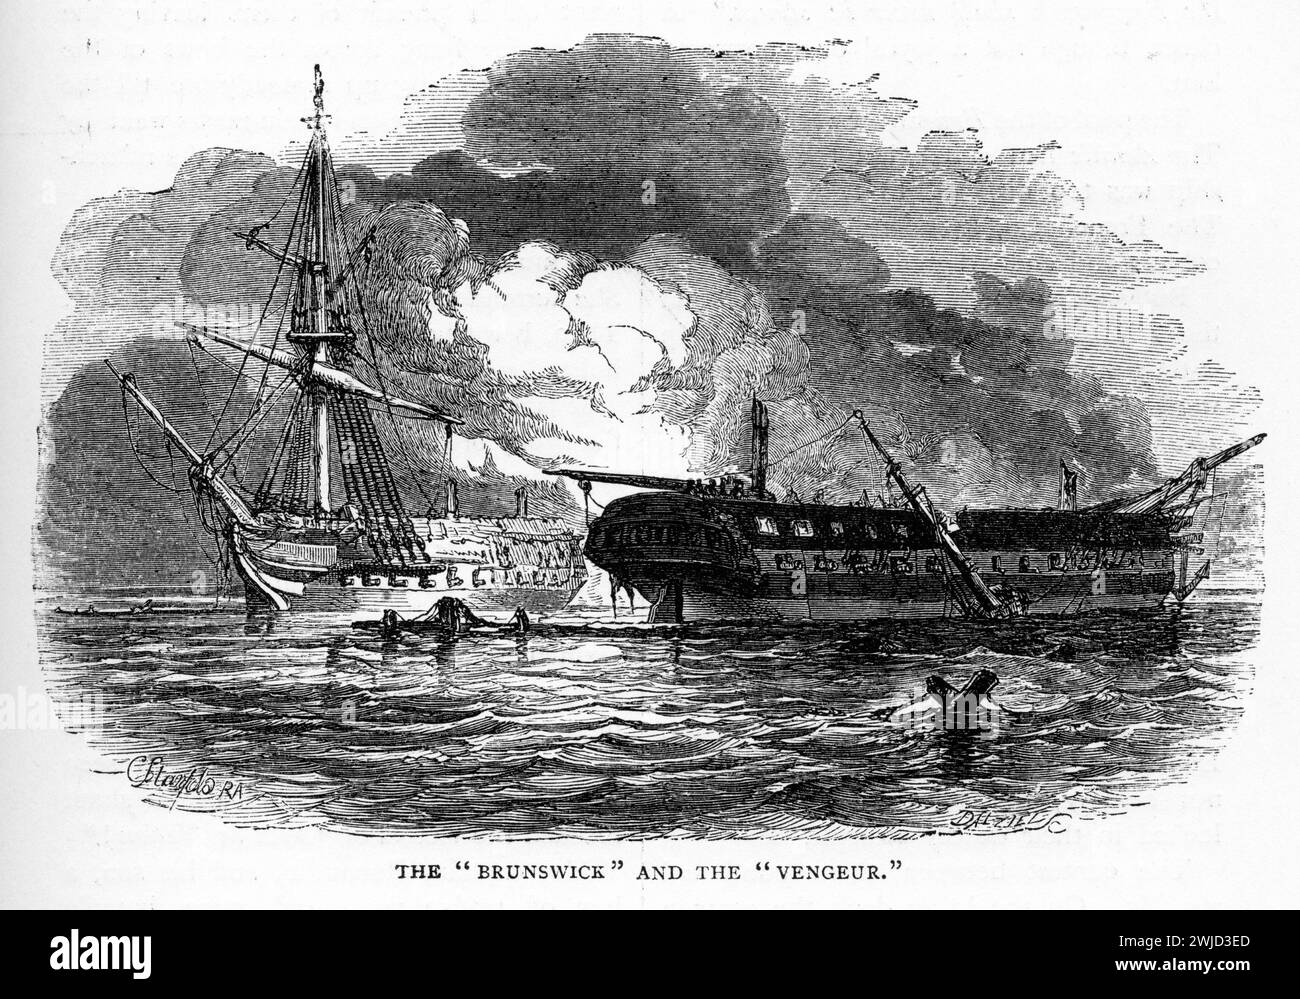 HMS Brunswick and the Venguer, published 1904. HMS Brunswick was a 74-gun third rate ship-of-the-line of the Royal Navy, launched on 30 April 1790 at Deptford. She was first commissioned in the following month under Sir Hyde Parker for the Spanish Armament but was not called into action. When the Russian Armament was resolved without conflict in August 1791, Brunswick took up service as a guardship in Portsmouth Harbour. She joined Richard Howe's Channel Fleet at the outbreak of the French Revolutionary War and was present at the battle on Glorious First of June where she fought a hard action Stock Photo